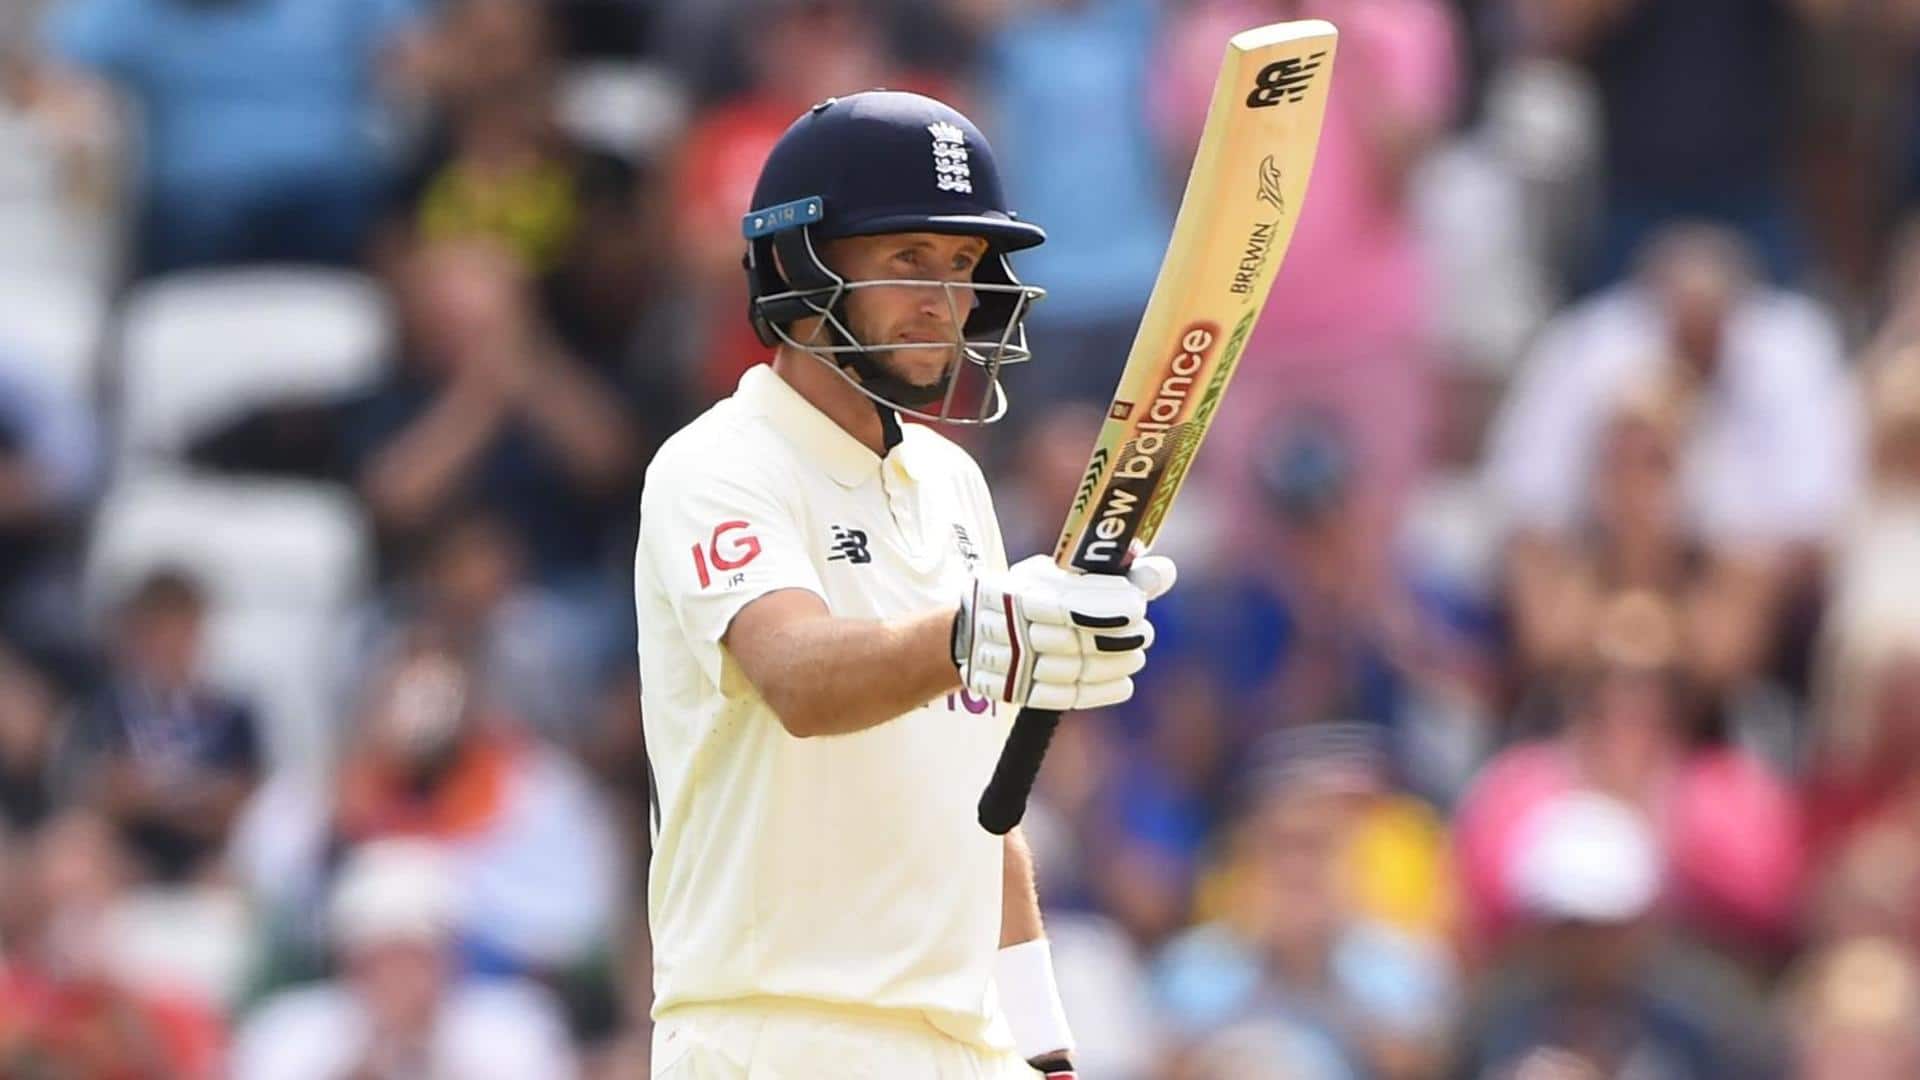 Joe Root becomes fastest Englishman to complete 11,000 Test runs